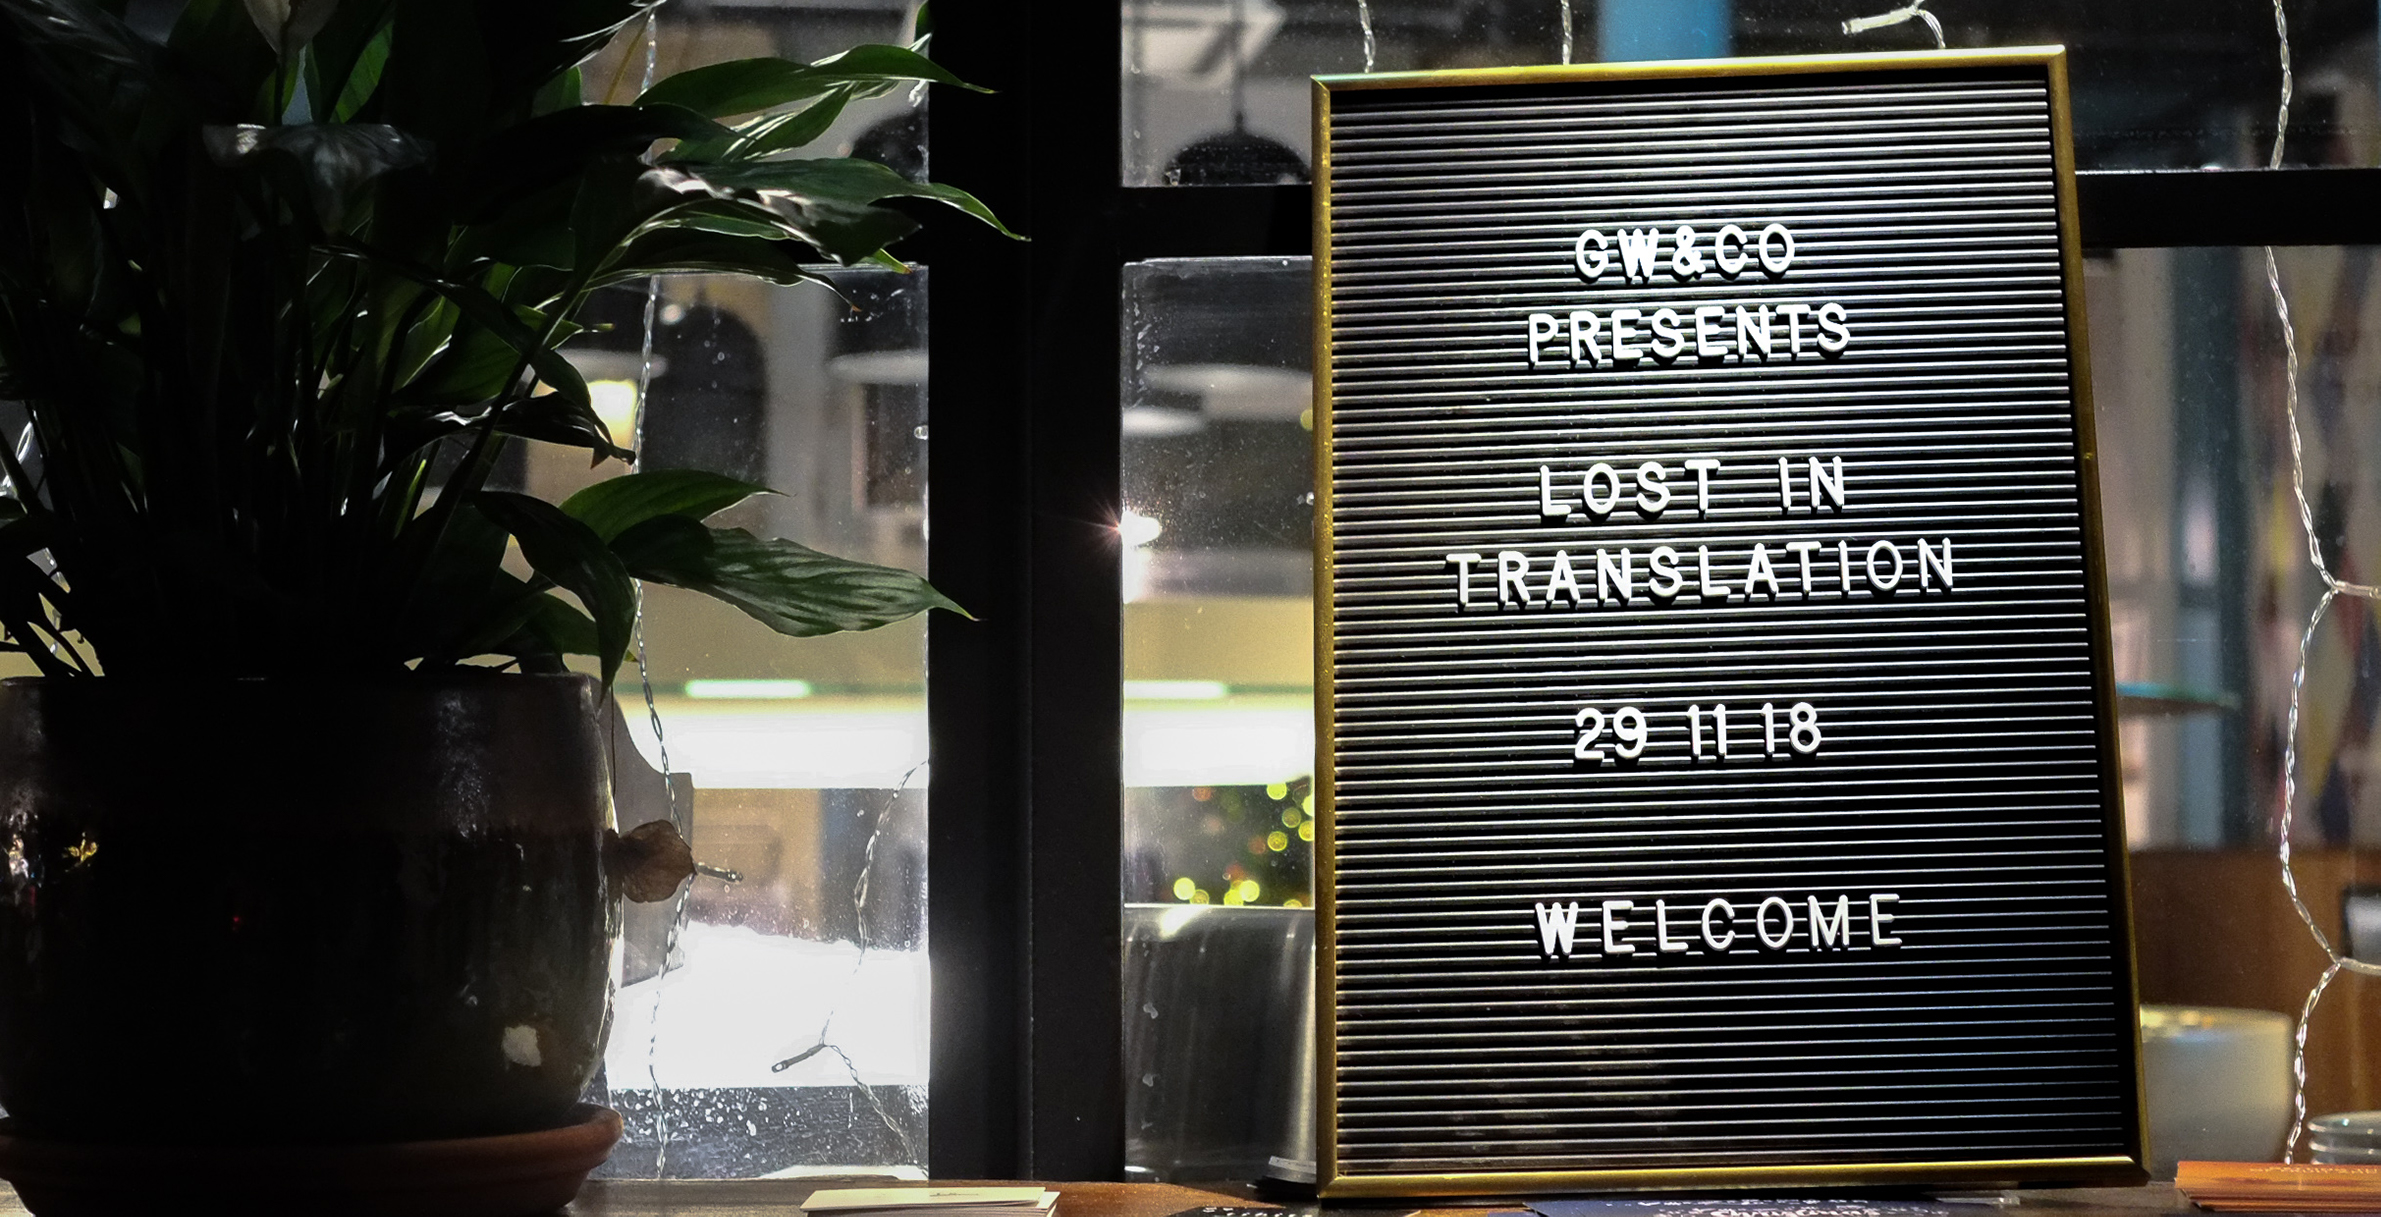 An evening of being lost in translation